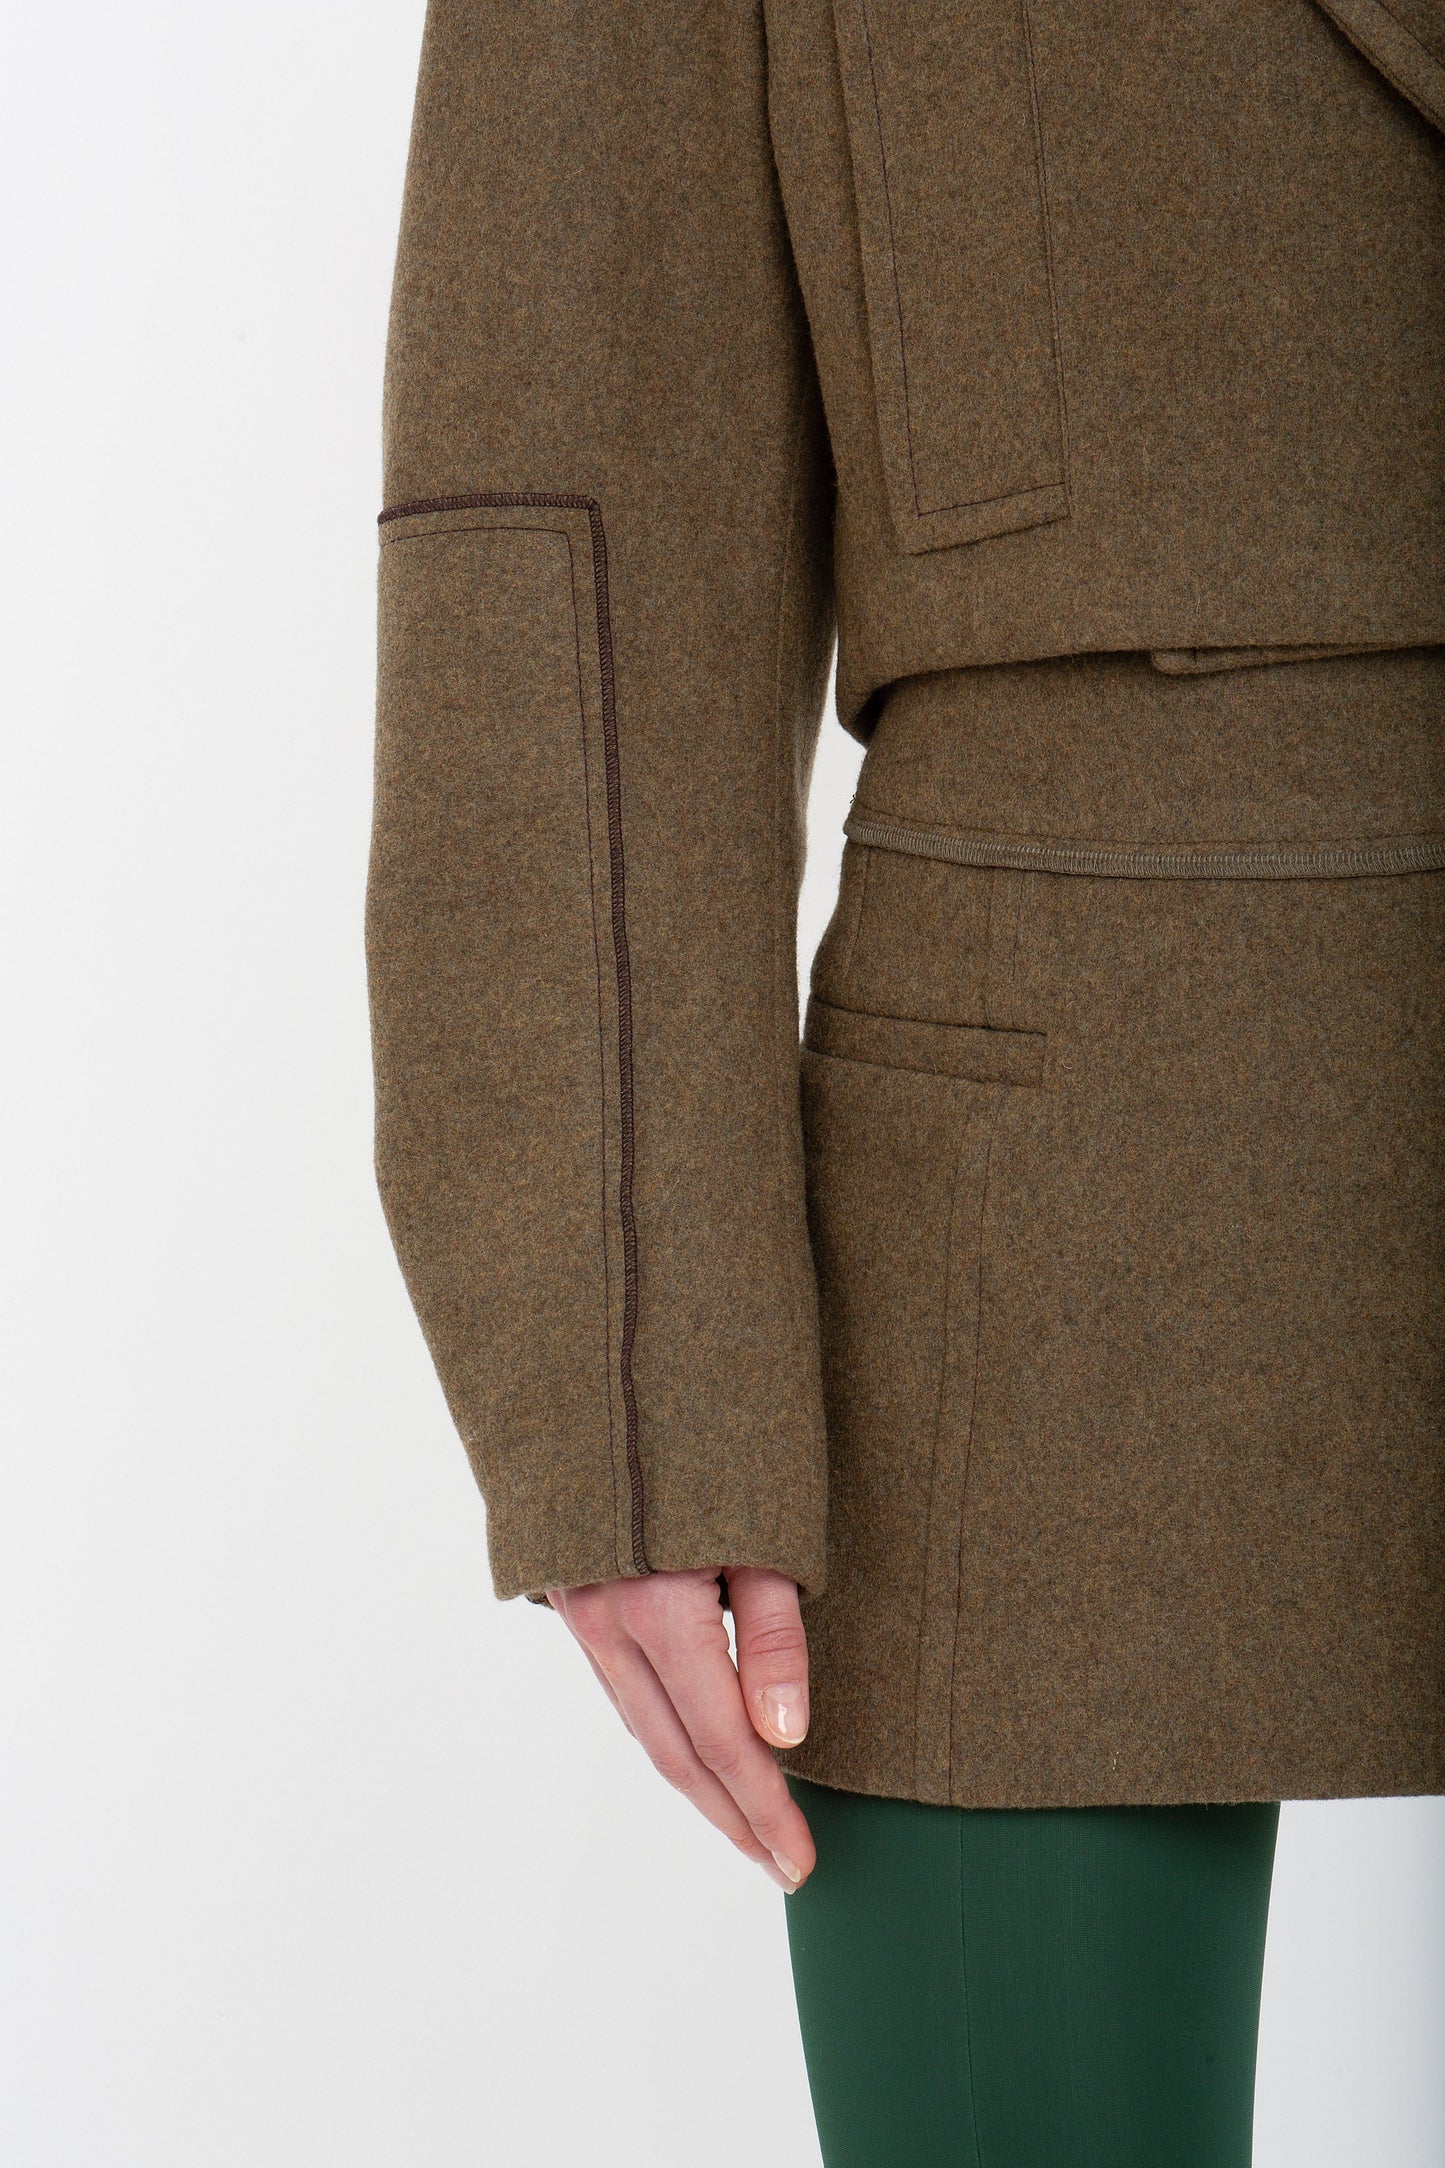 Close-up of a person wearing a Cropped Pea Coat In Khaki by Victoria Beckham with visible seams and green pants, showing the left side of the coat with one arm partially visible.